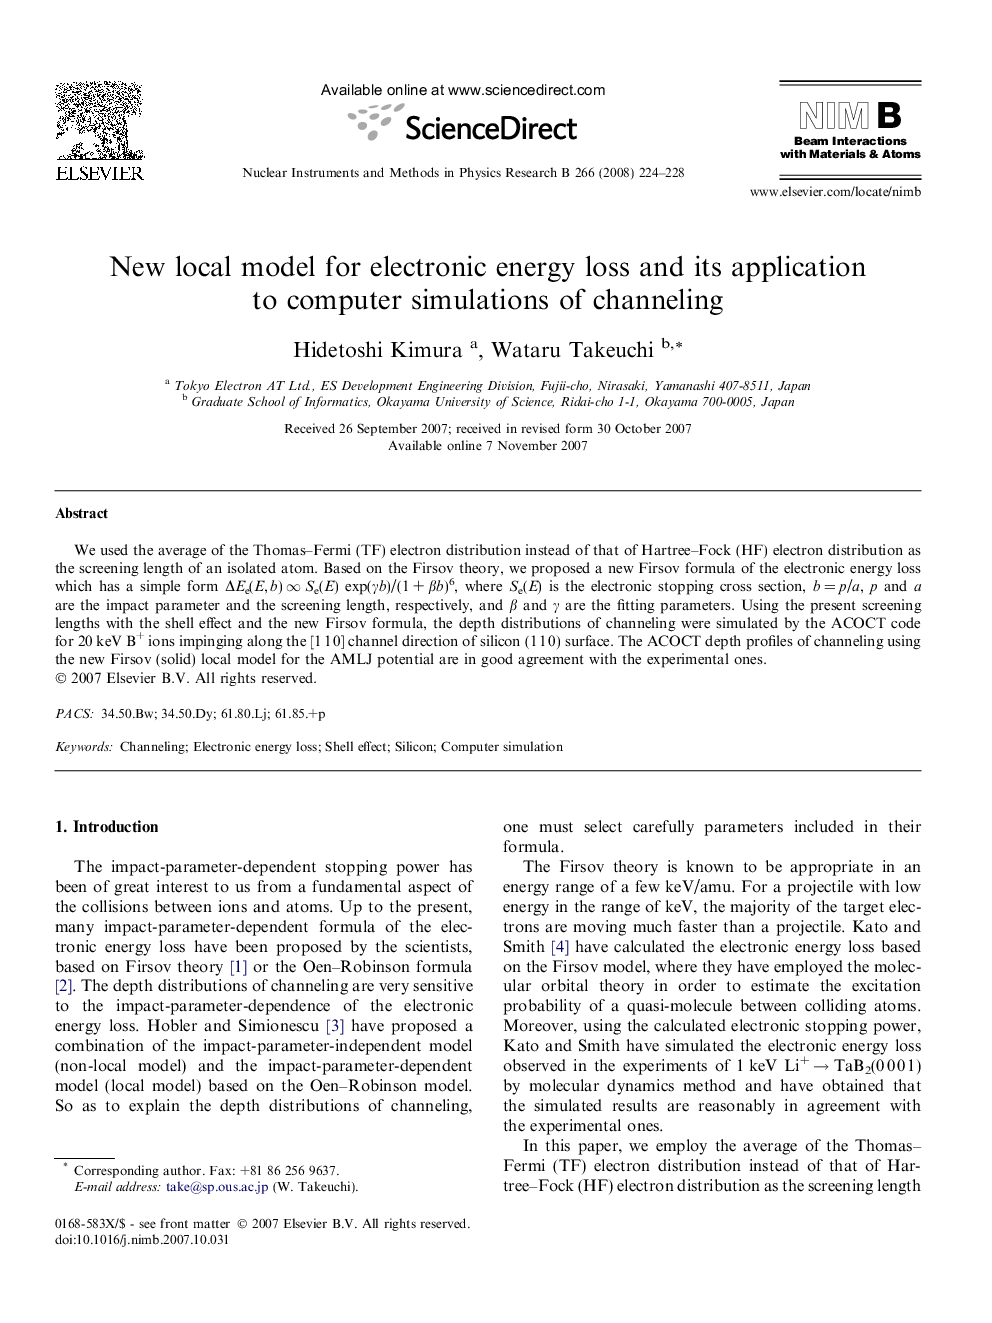 New local model for electronic energy loss and its application to computer simulations of channeling